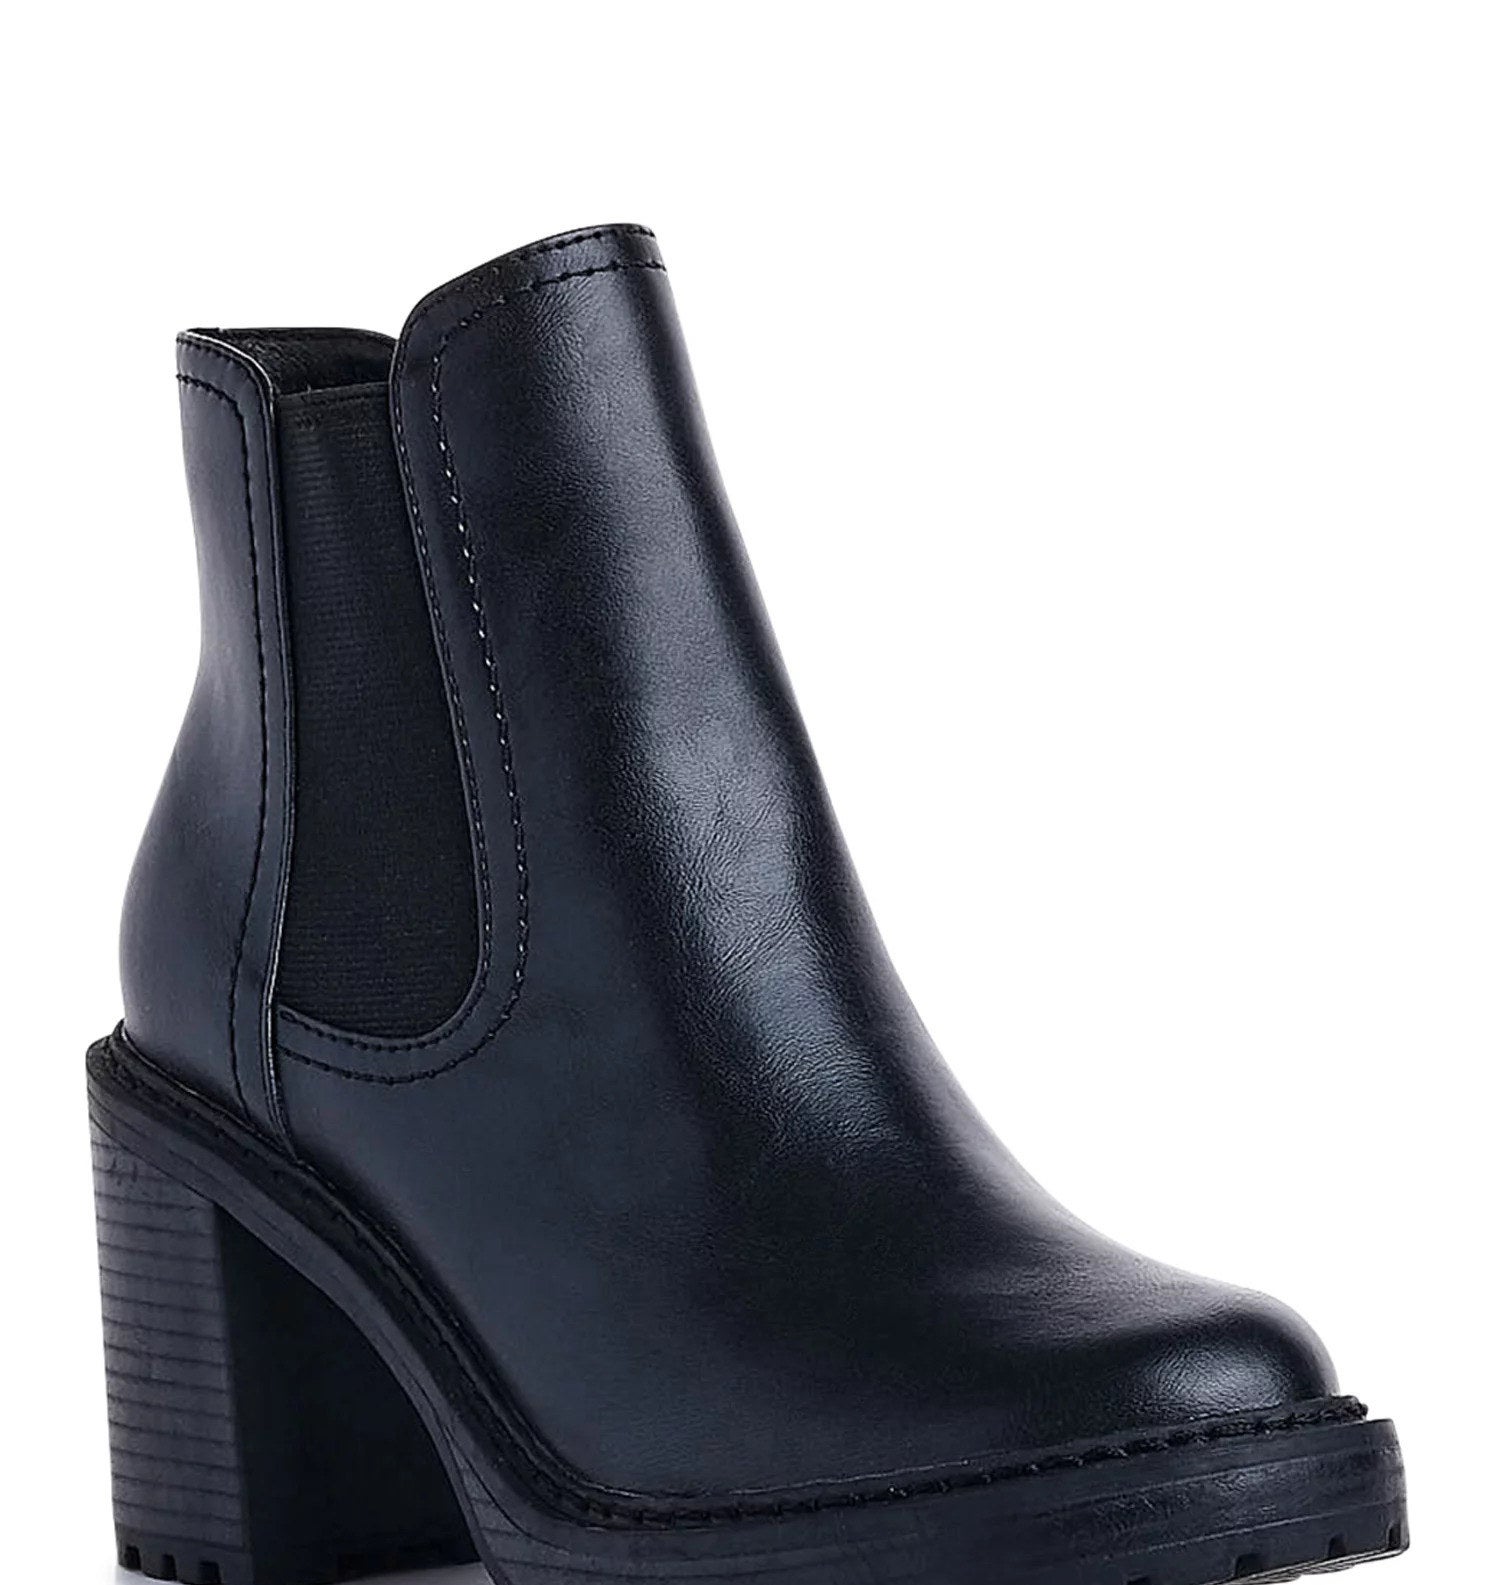 The Chelsea boot